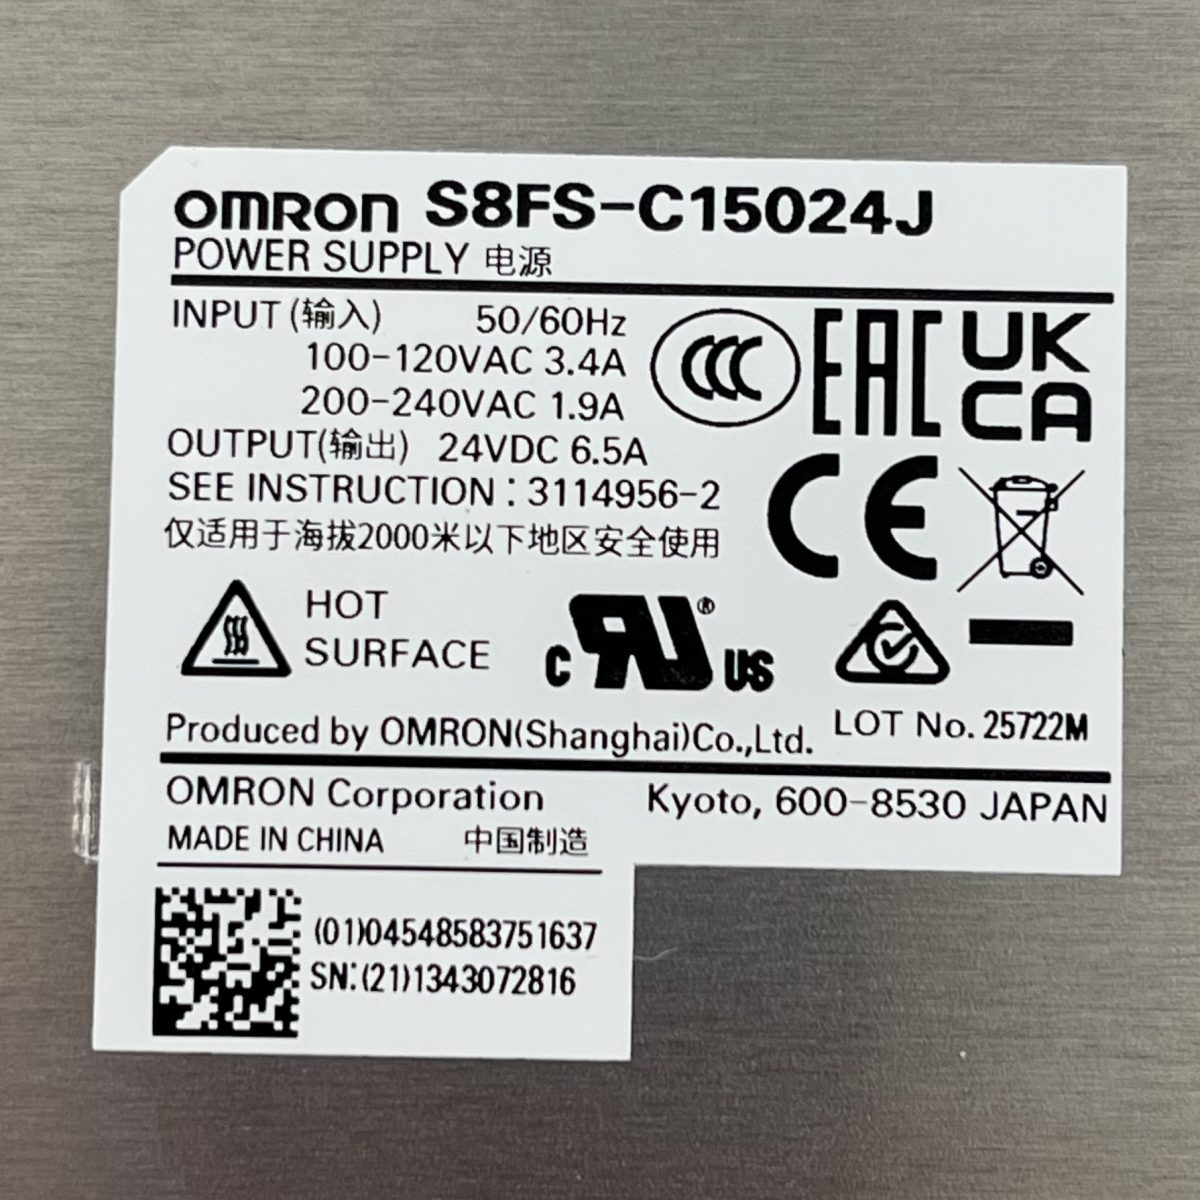 Omron Power Supply (S8F8-C15024J) Futures (3)